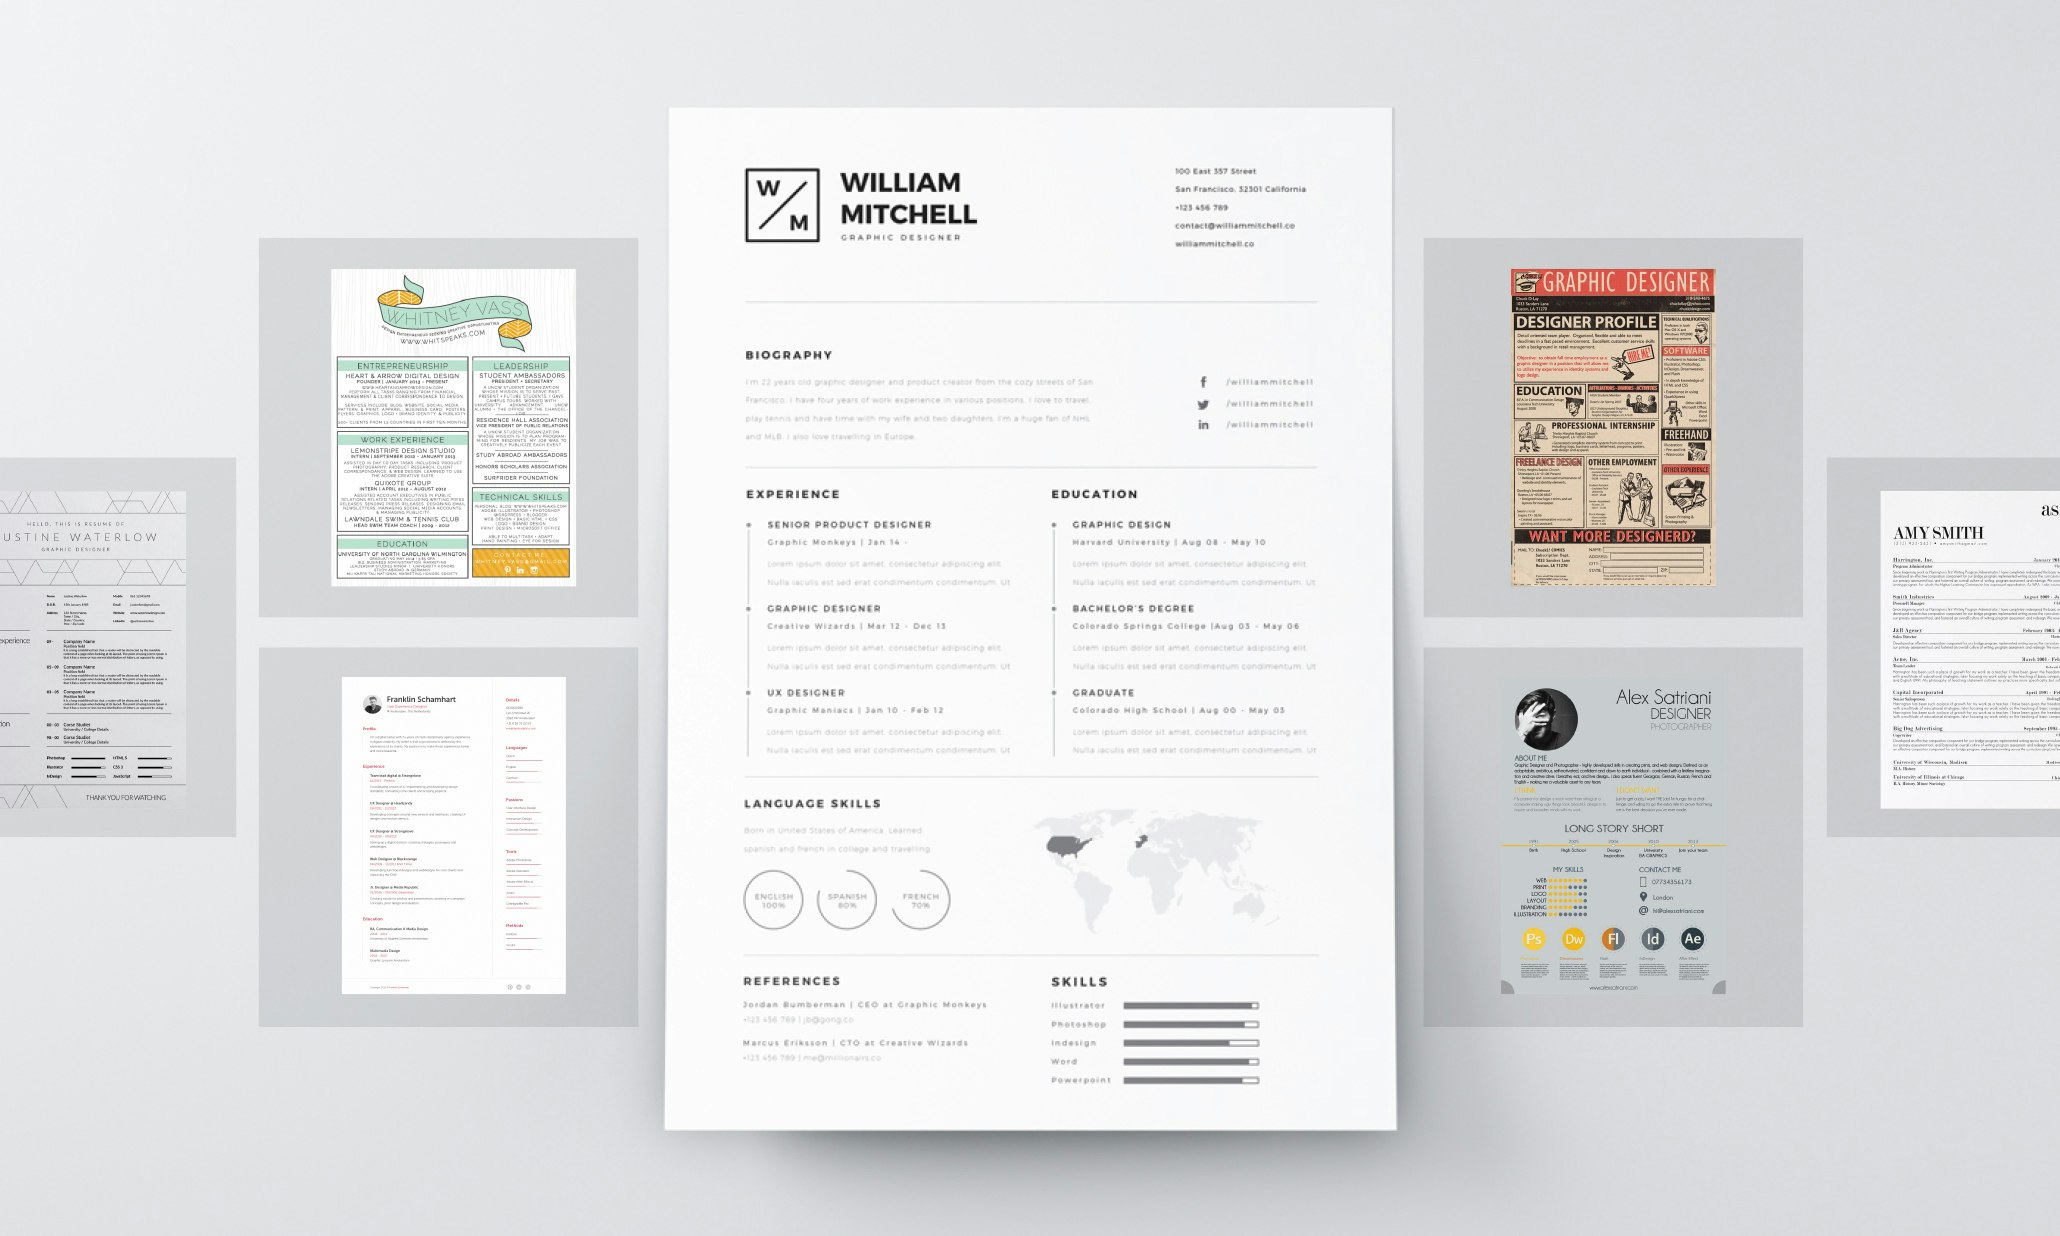 7 resume design principles that will get you hired